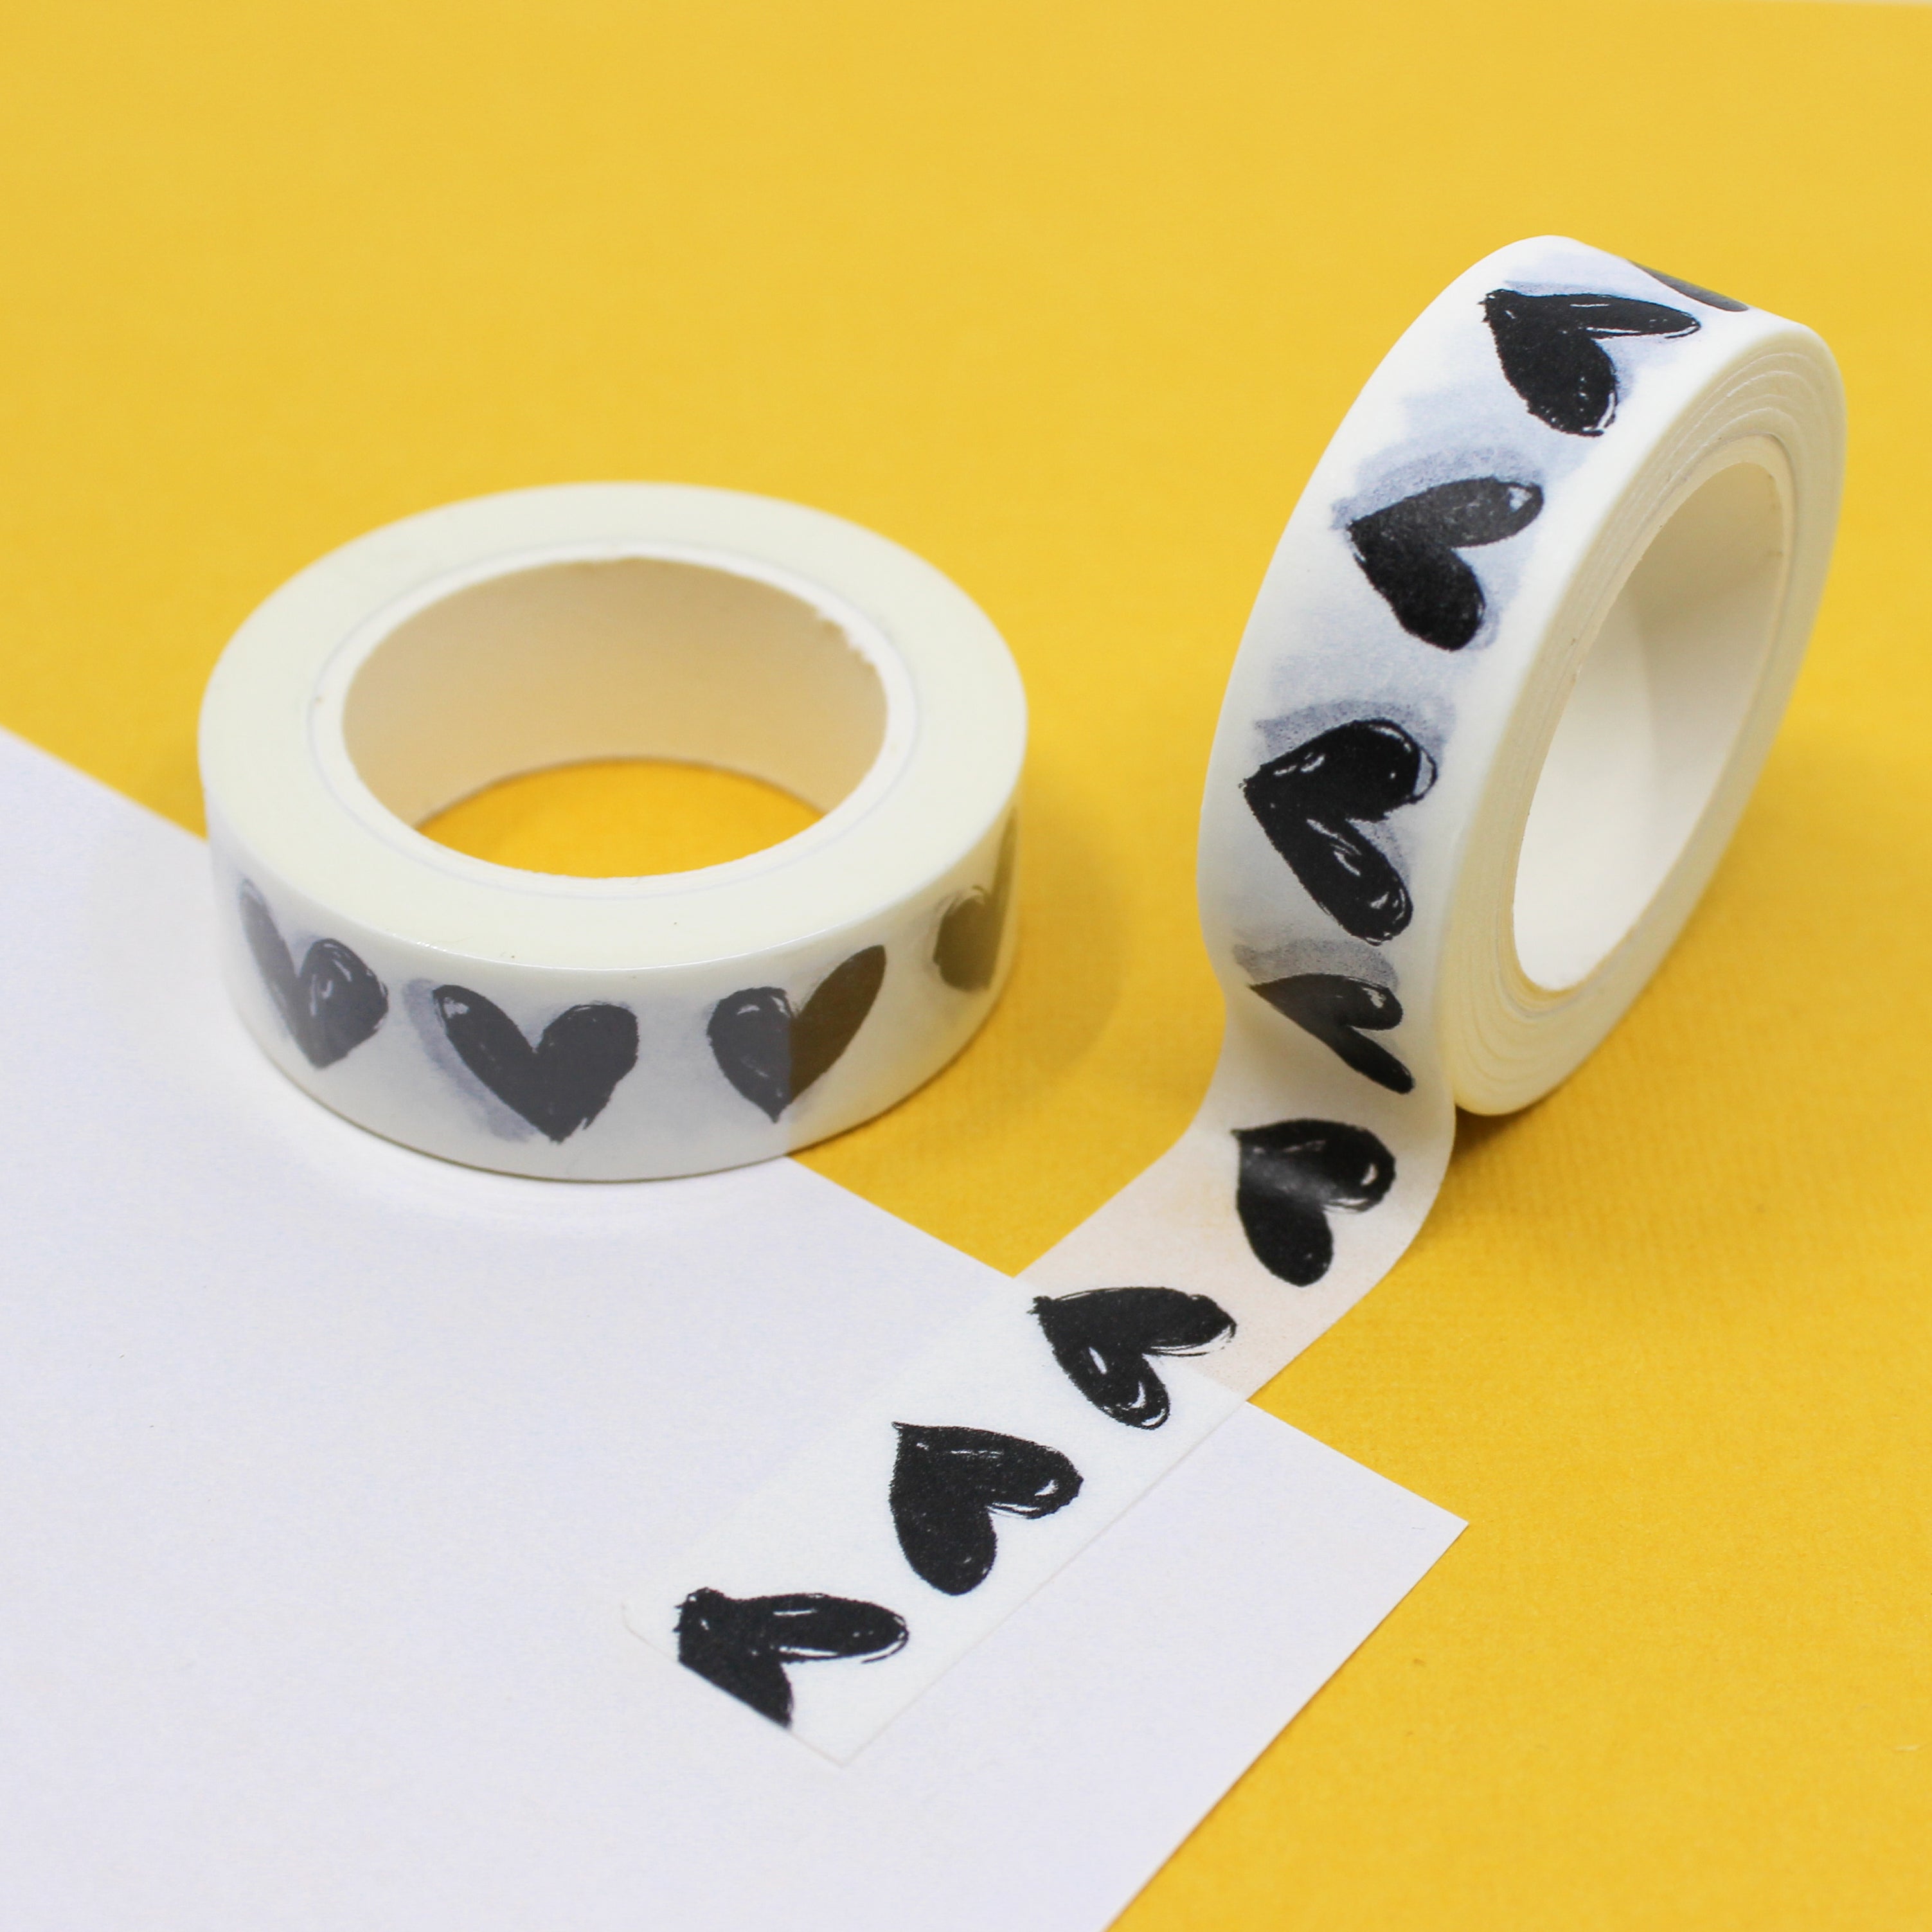 This is a solid black sketchy hearts view themed washi tape from BBB Supplies Craft Shop